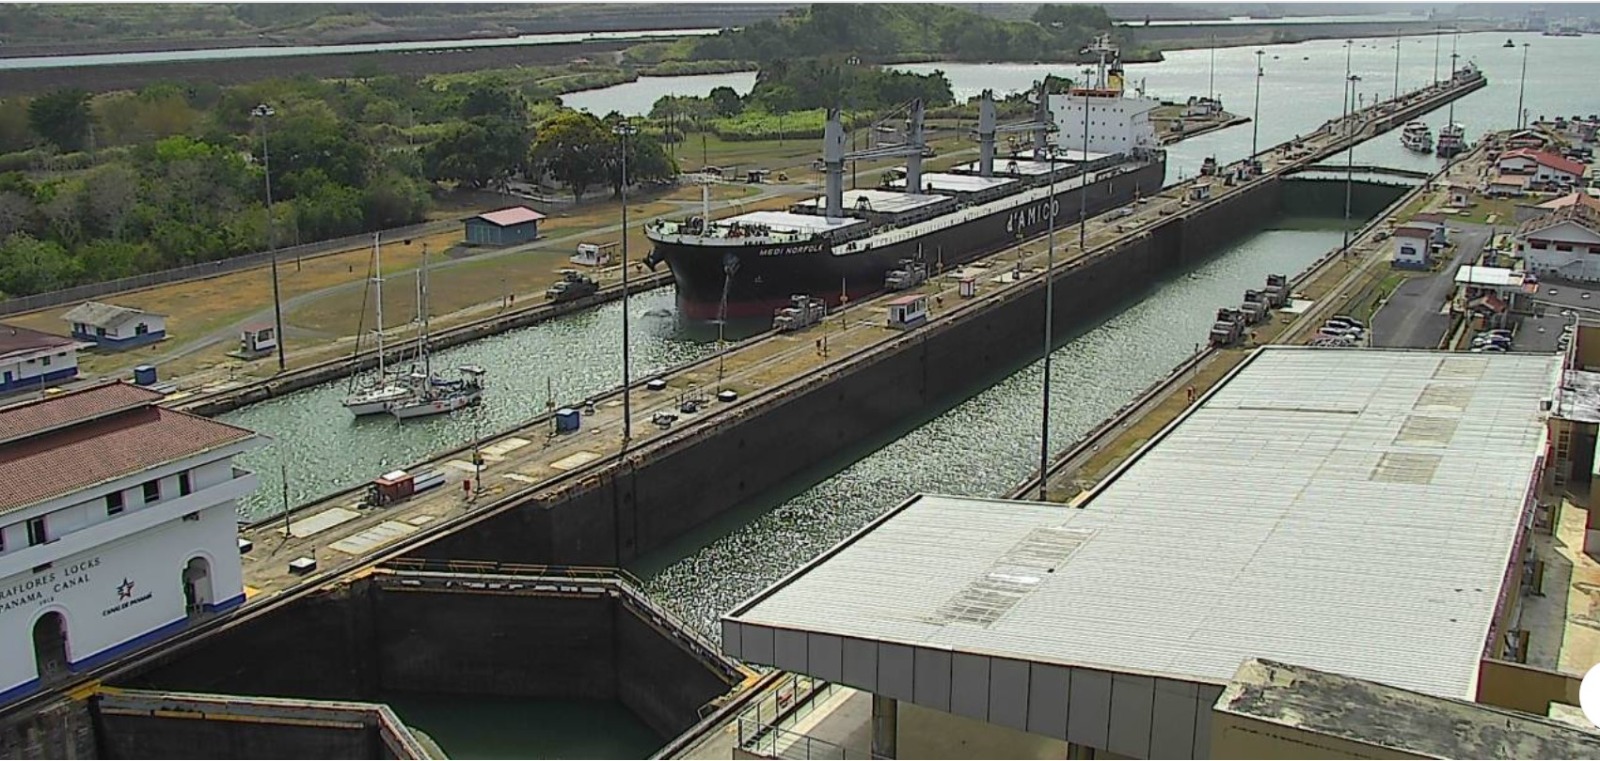 The Panama canal images/2023/can/mia4.jpg